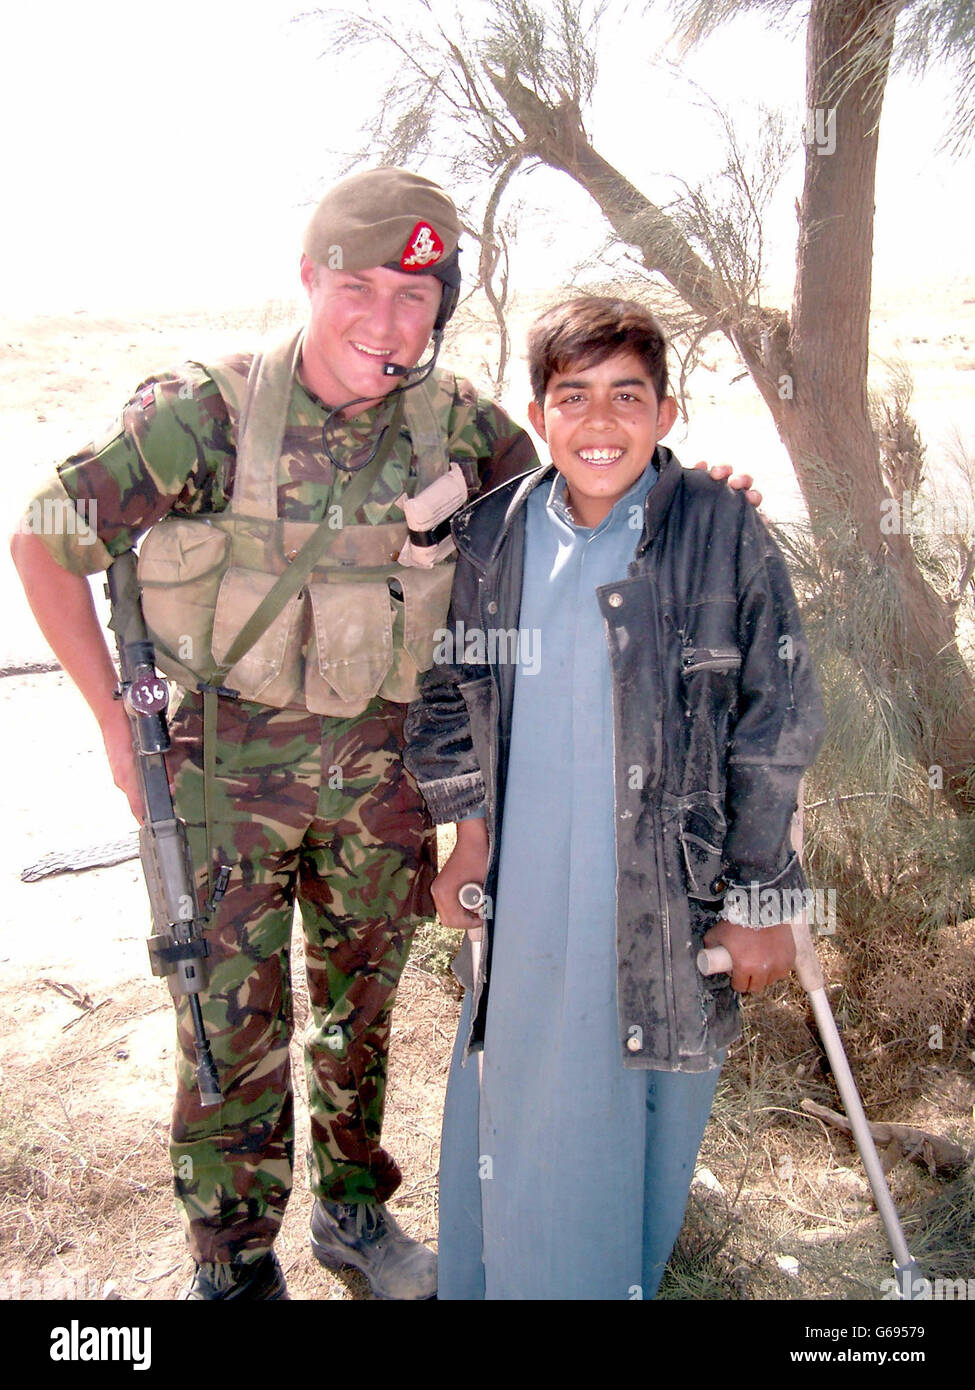 Lance Corporal Nigel Wrigley (Duke of Wellington's Regiment)- without his helmet for the first time since the start of the Iraq campaign - cuddles a boy landmine victim near Safwan, Iraq. Stock Photo